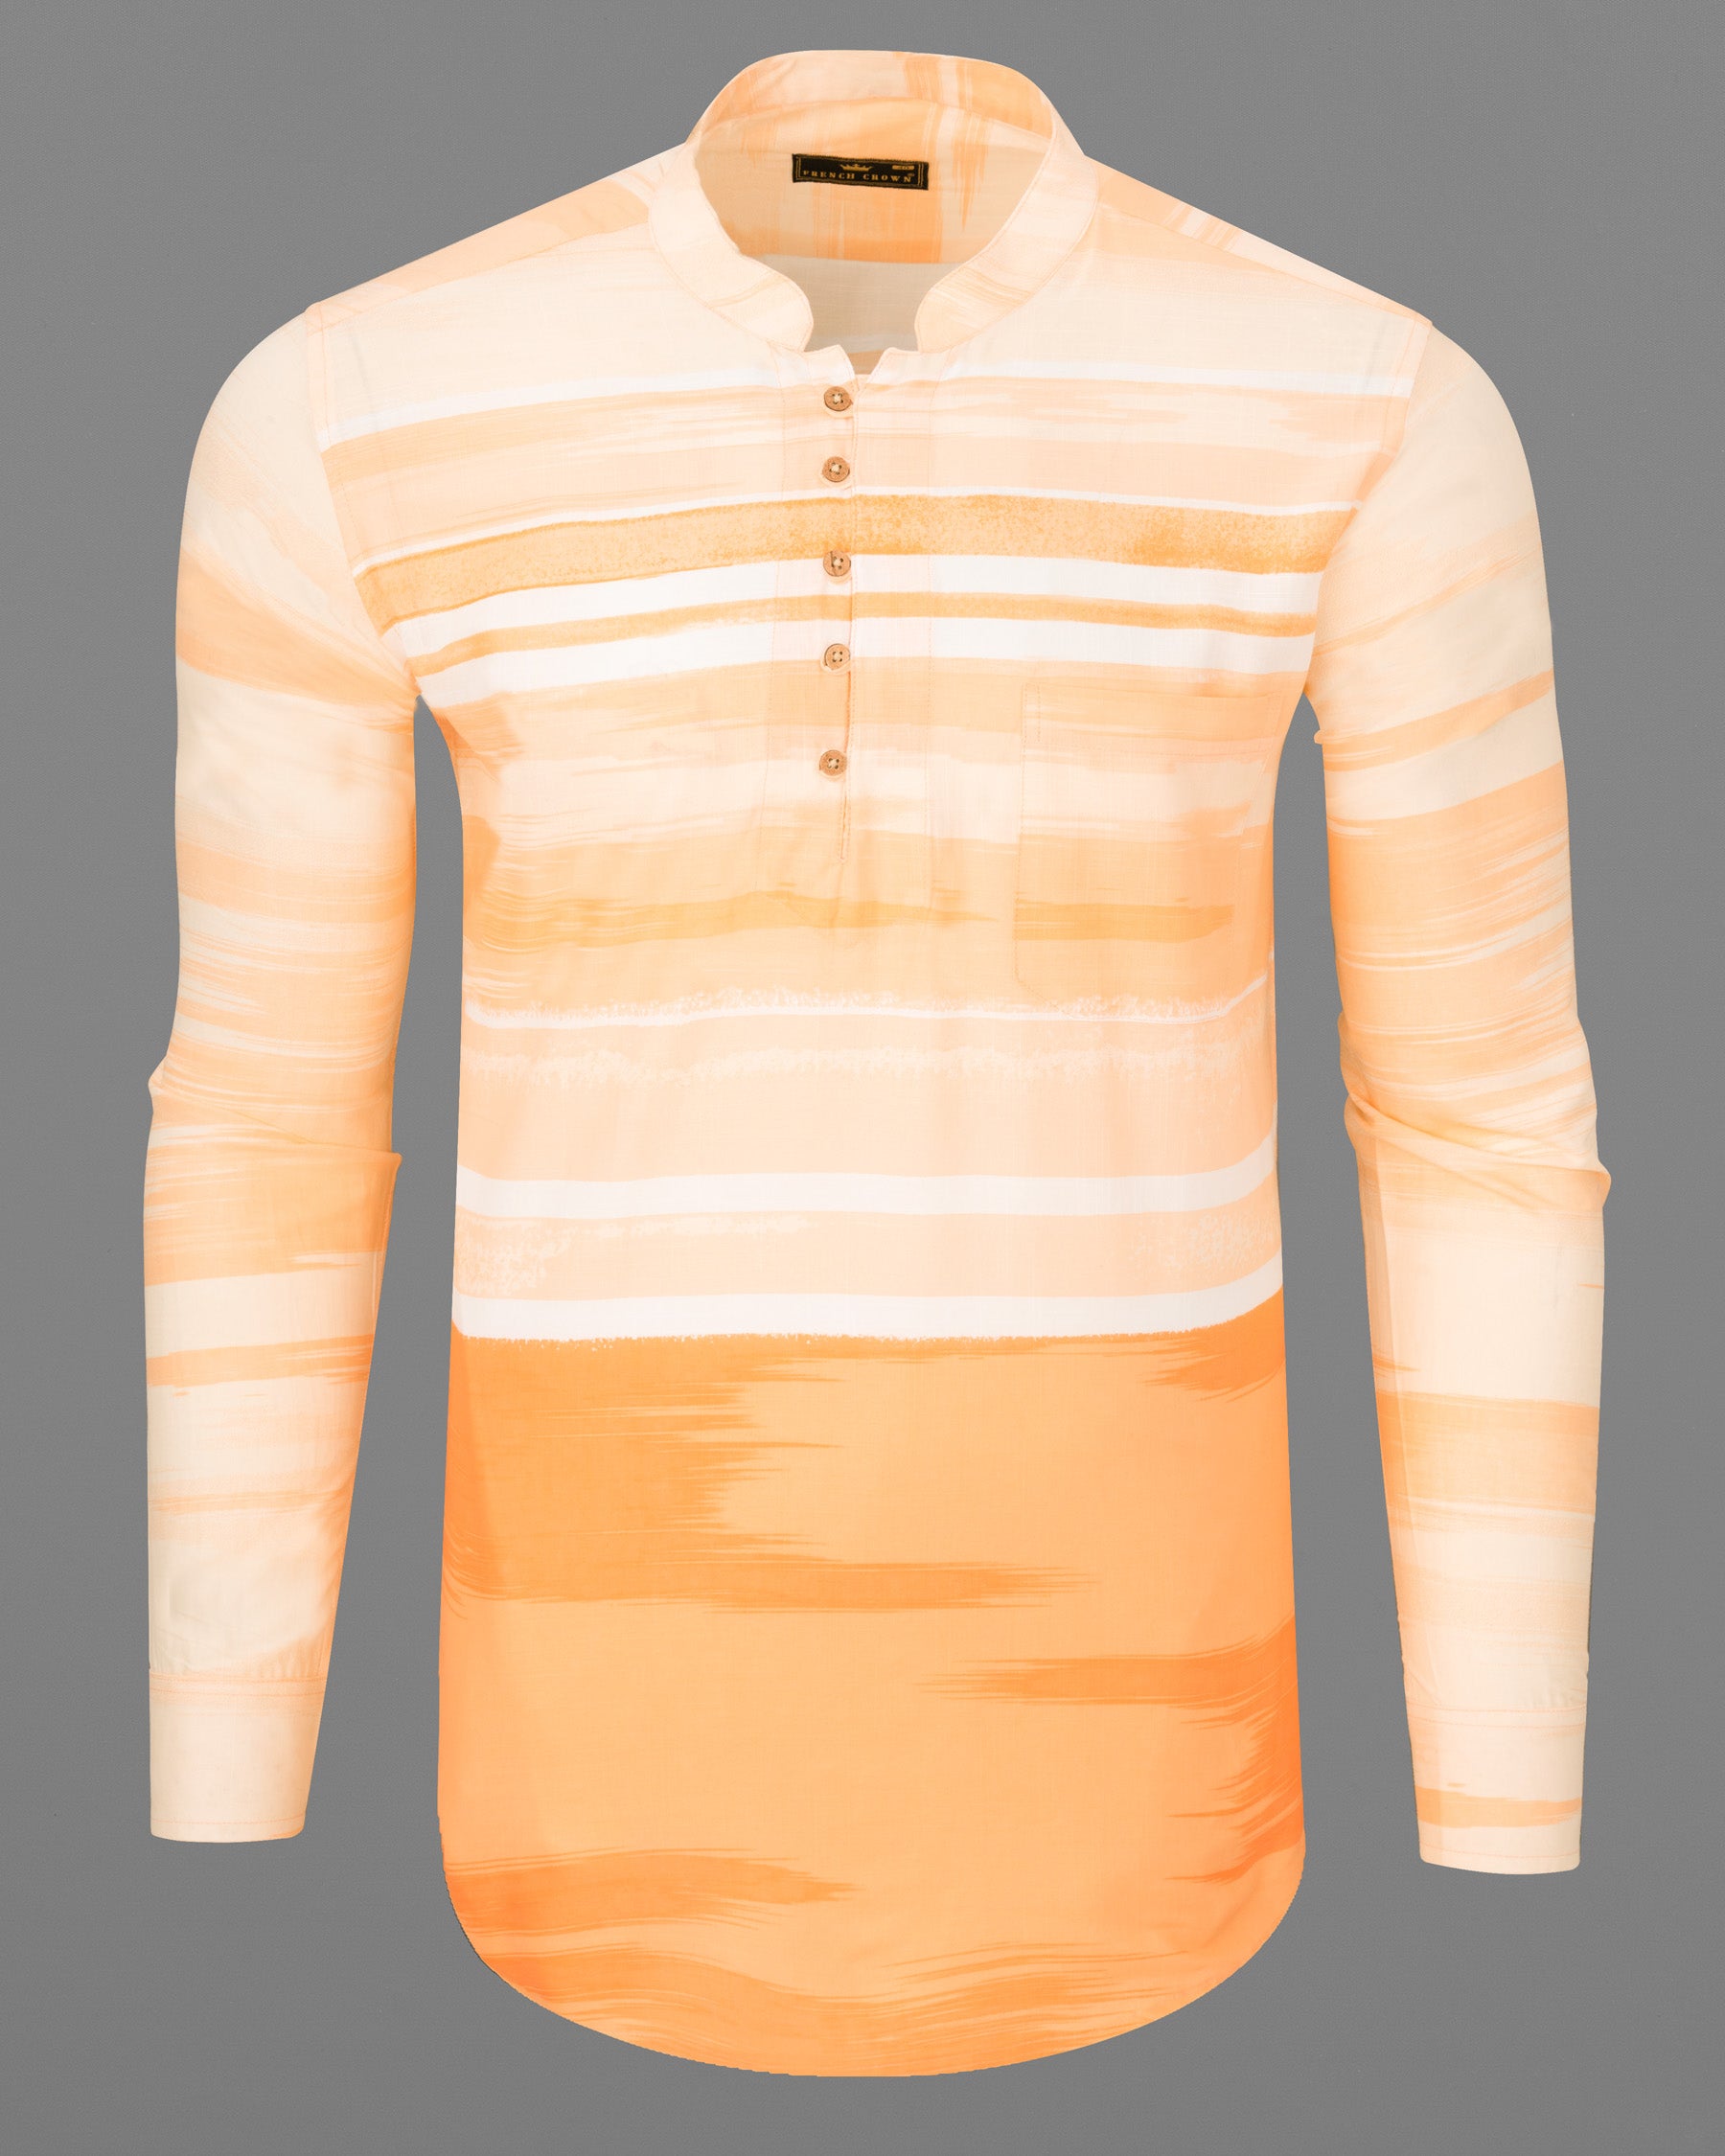 Neon Carrot with white irregular Striped Premium Cotton Kurta Shirt 6845-KS-38,6845-KS-38,6845-KS-39,6845-KS-39,6845-KS-40,6845-KS-40,6845-KS-42,6845-KS-42,6845-KS-44,6845-KS-44,6845-KS-46,6845-KS-46,6845-KS-48,6845-KS-48,6845-KS-50,6845-KS-50,6845-KS-52,6845-KS-52